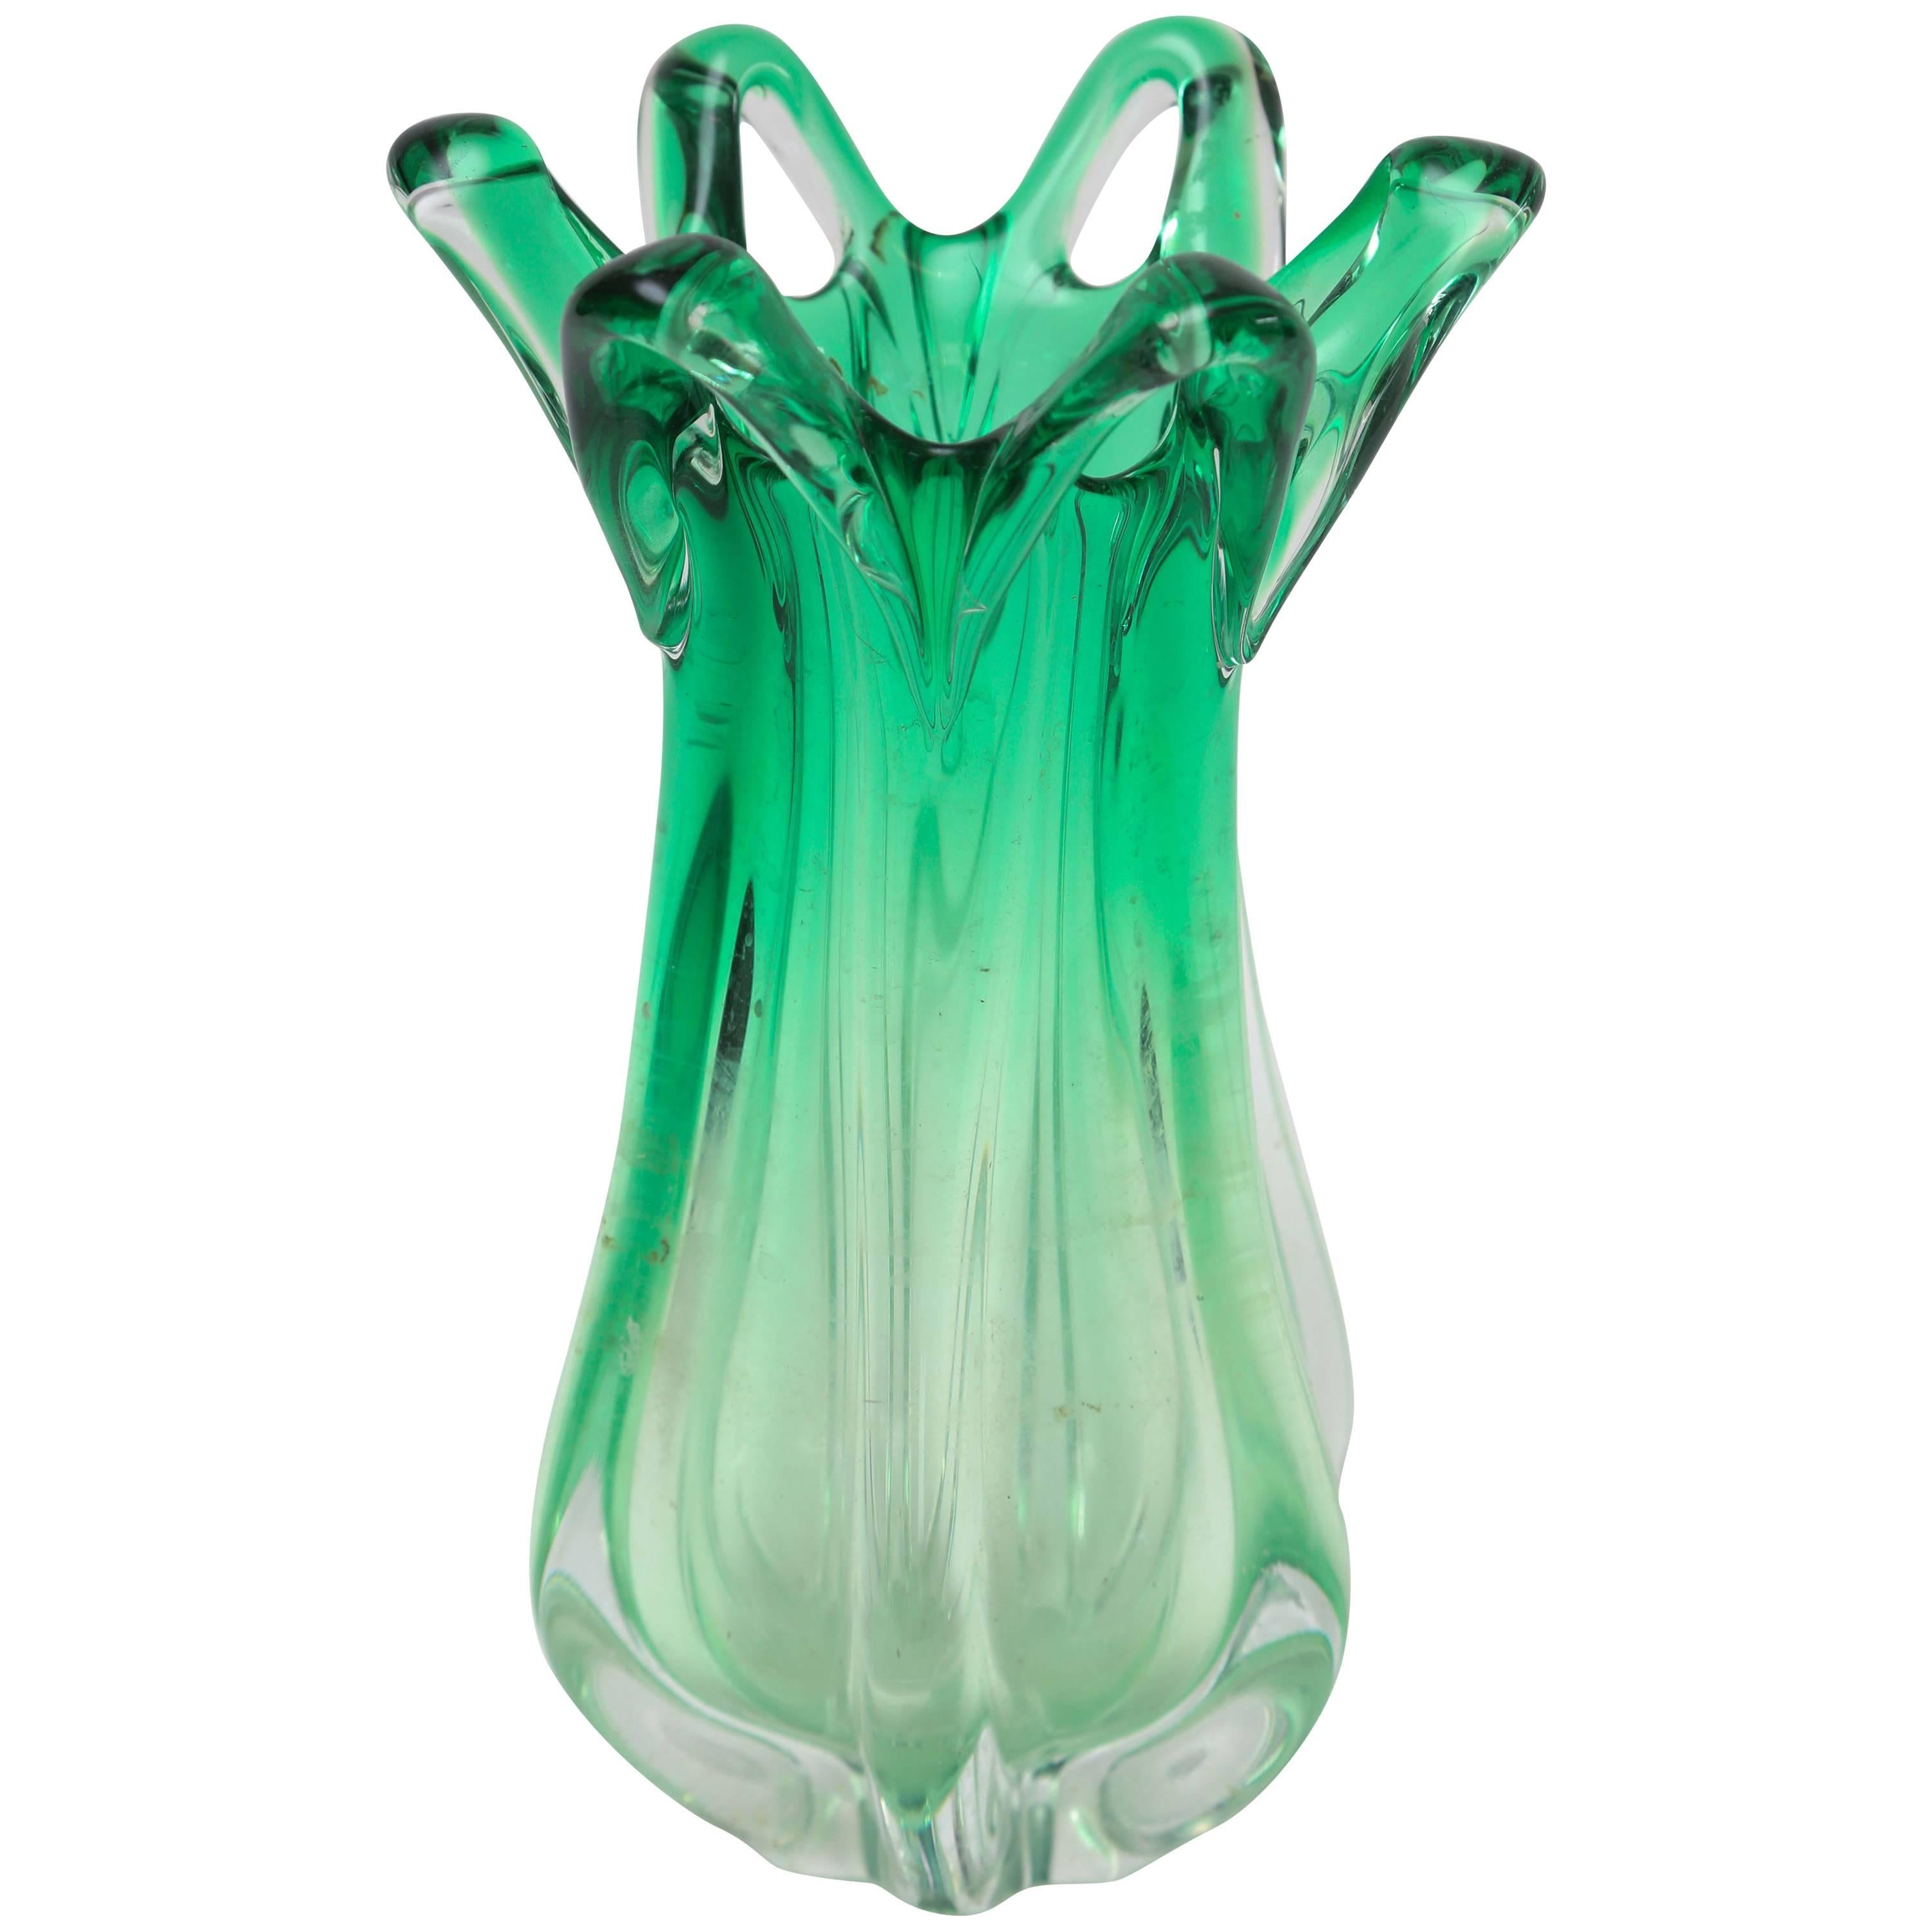 Green Ombre Murano Vase, 1960s, Italy For Sale